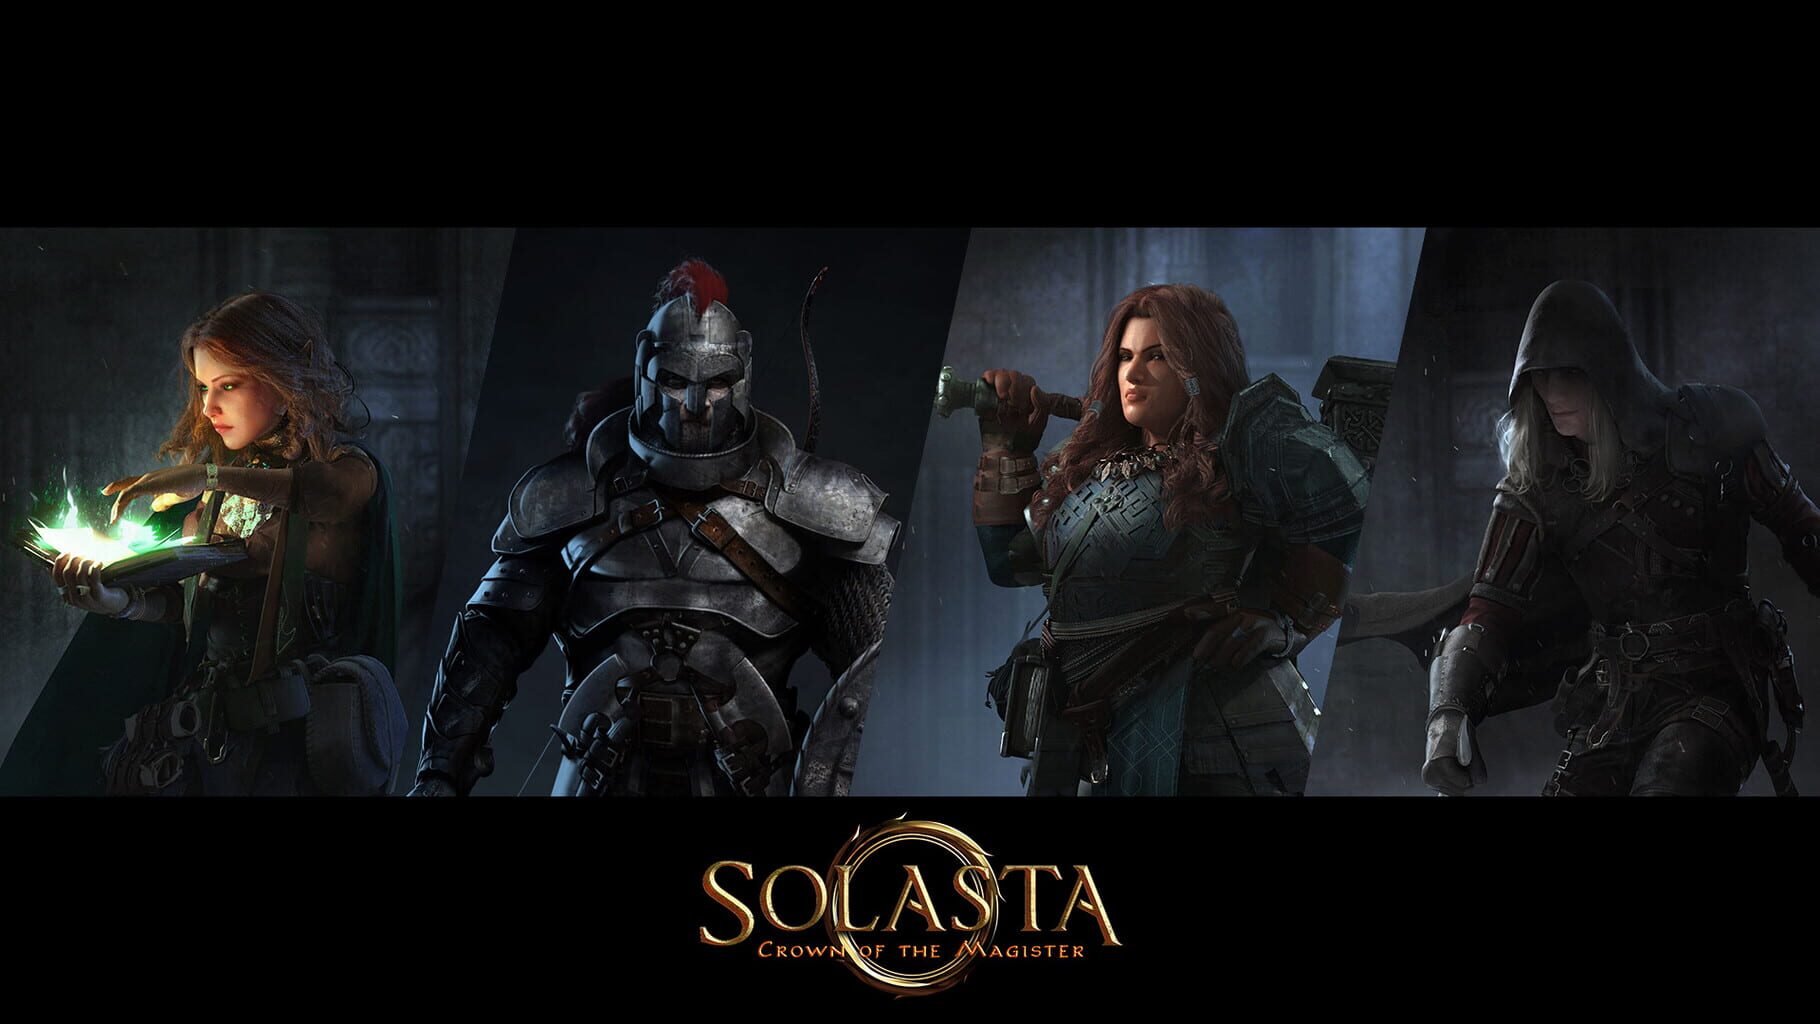 Solasta: Crown of the Magister screenshots